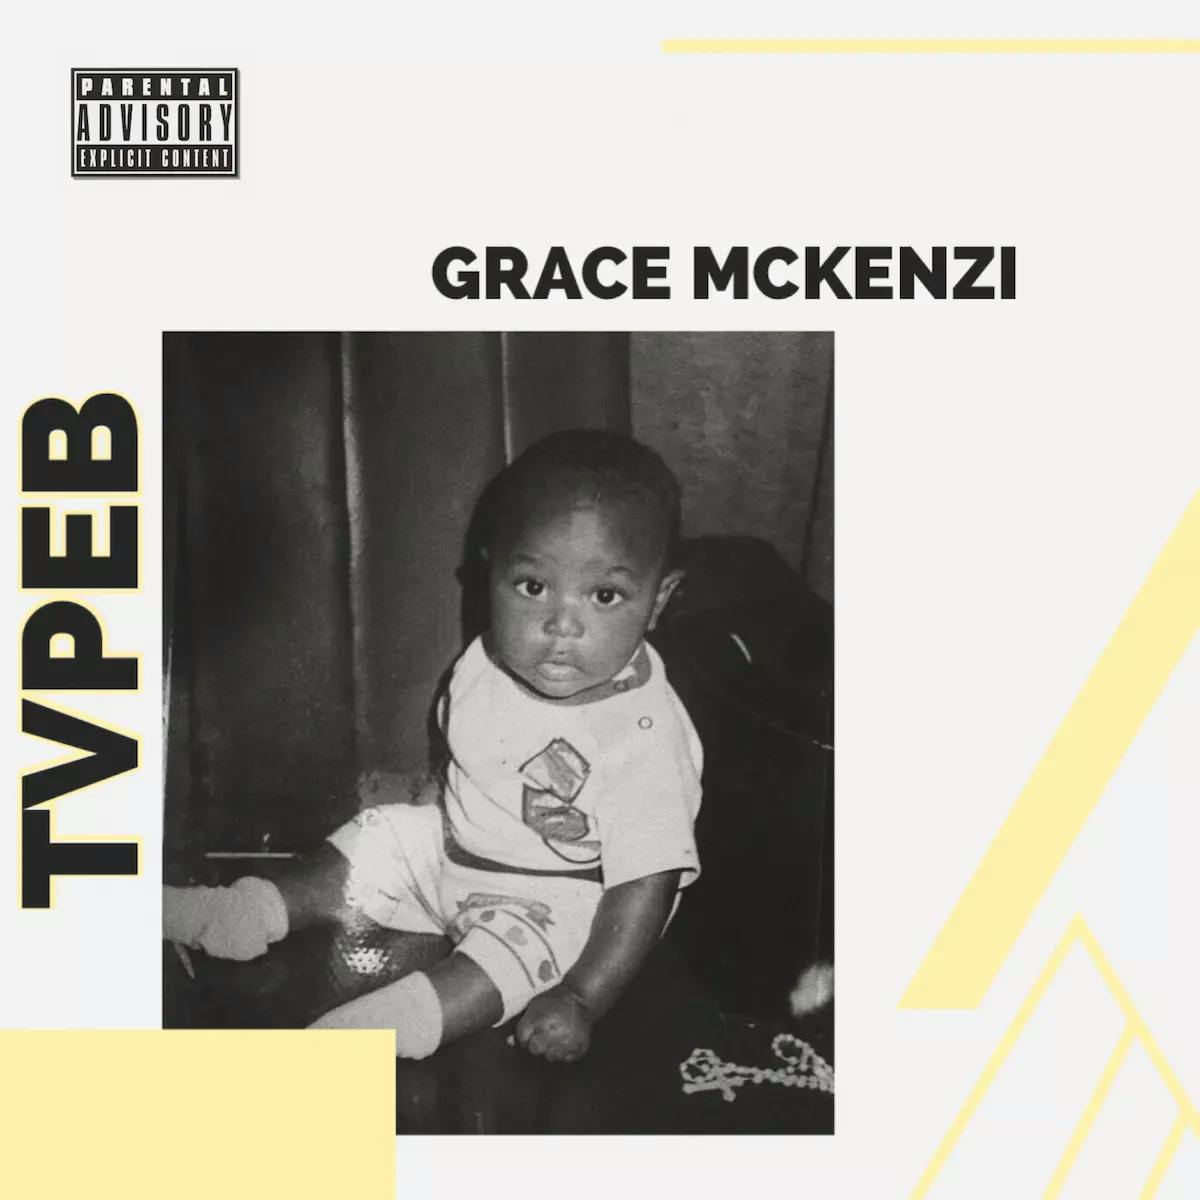 A baby staring at the camera with text "TVPEB Grace Mckenzi"